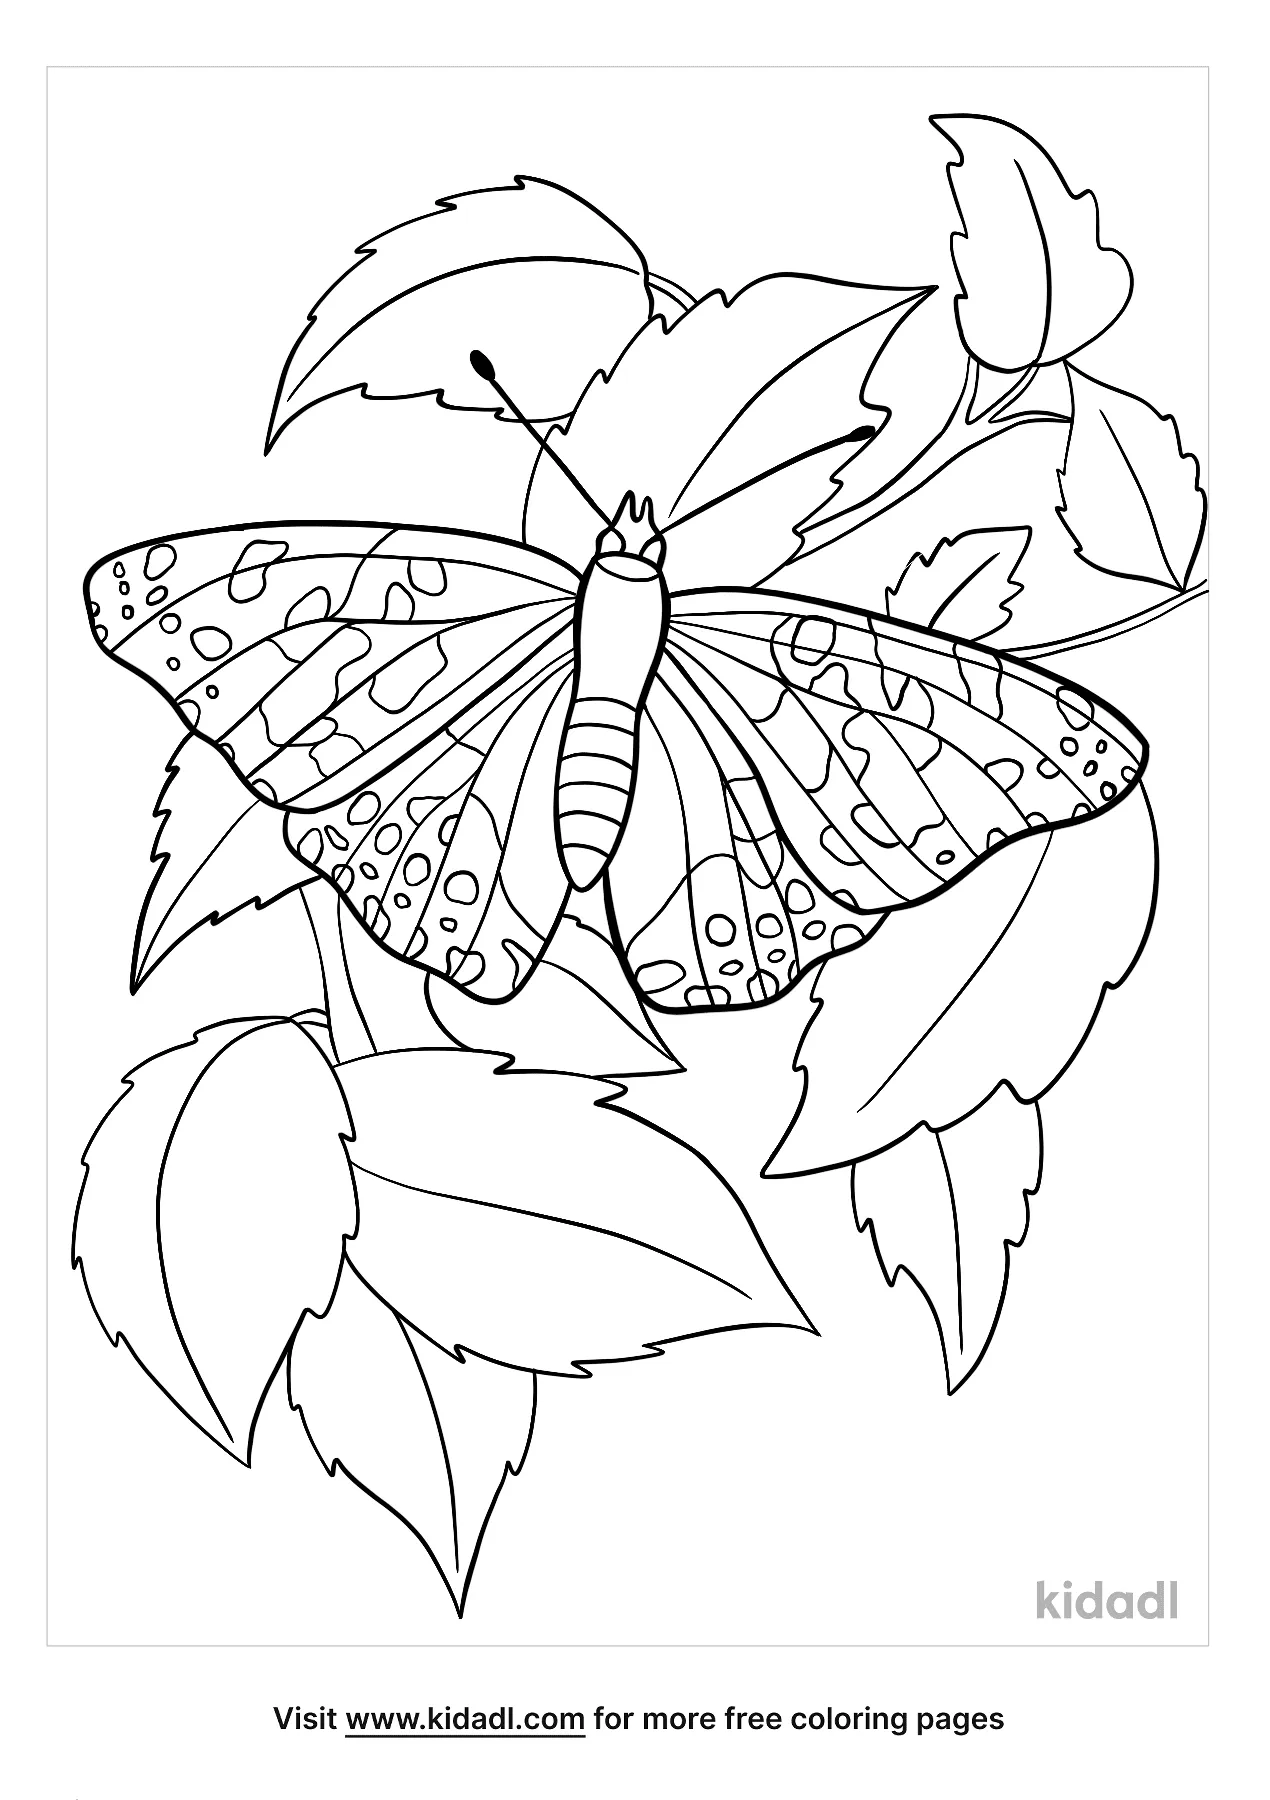 Painted Lady Butterfly Coloring Pages   Free Butterflies Coloring ...